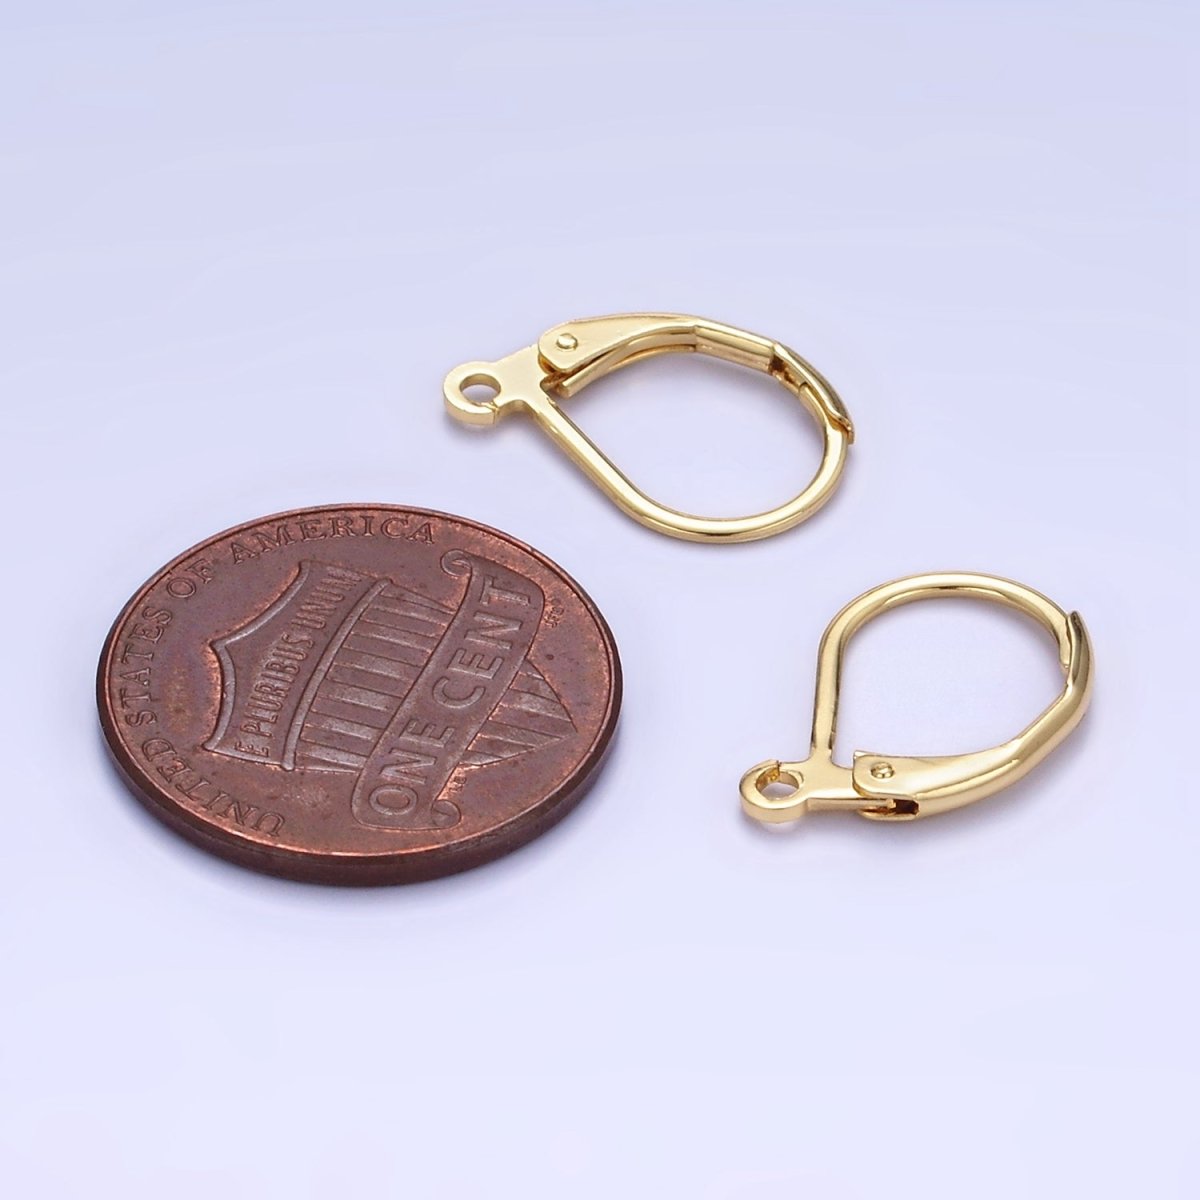 French Lever Back Earrings Supply with Loop Lever Back Earring Findings for Earring Making Supply Z-759 - DLUXCA